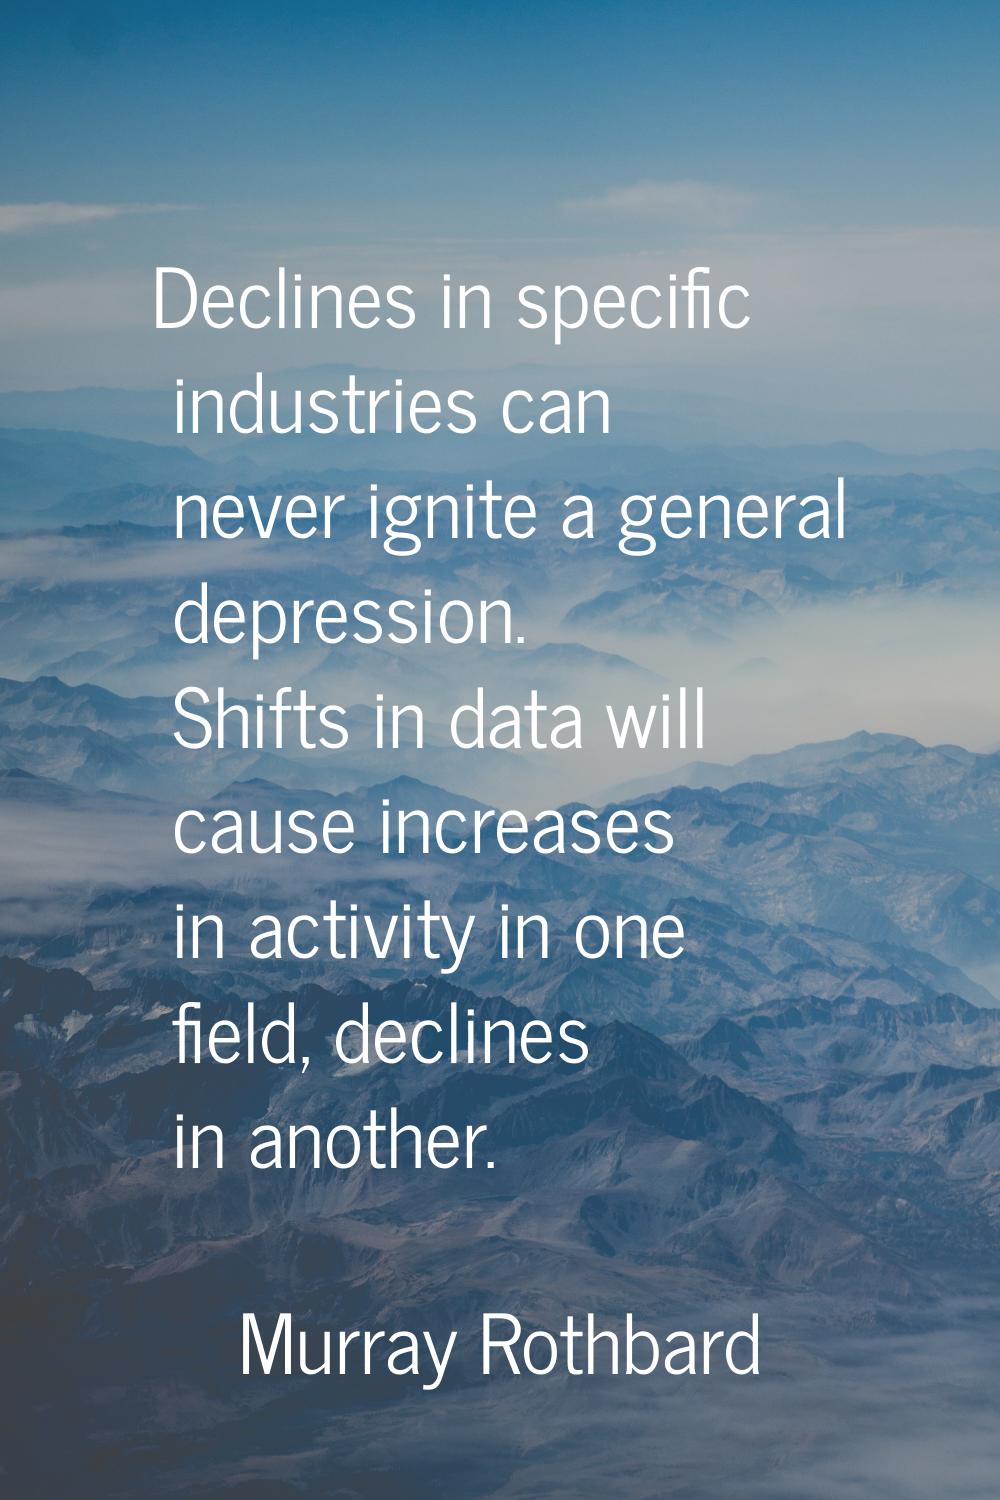 Declines in specific industries can never ignite a general depression. Shifts in data will cause in